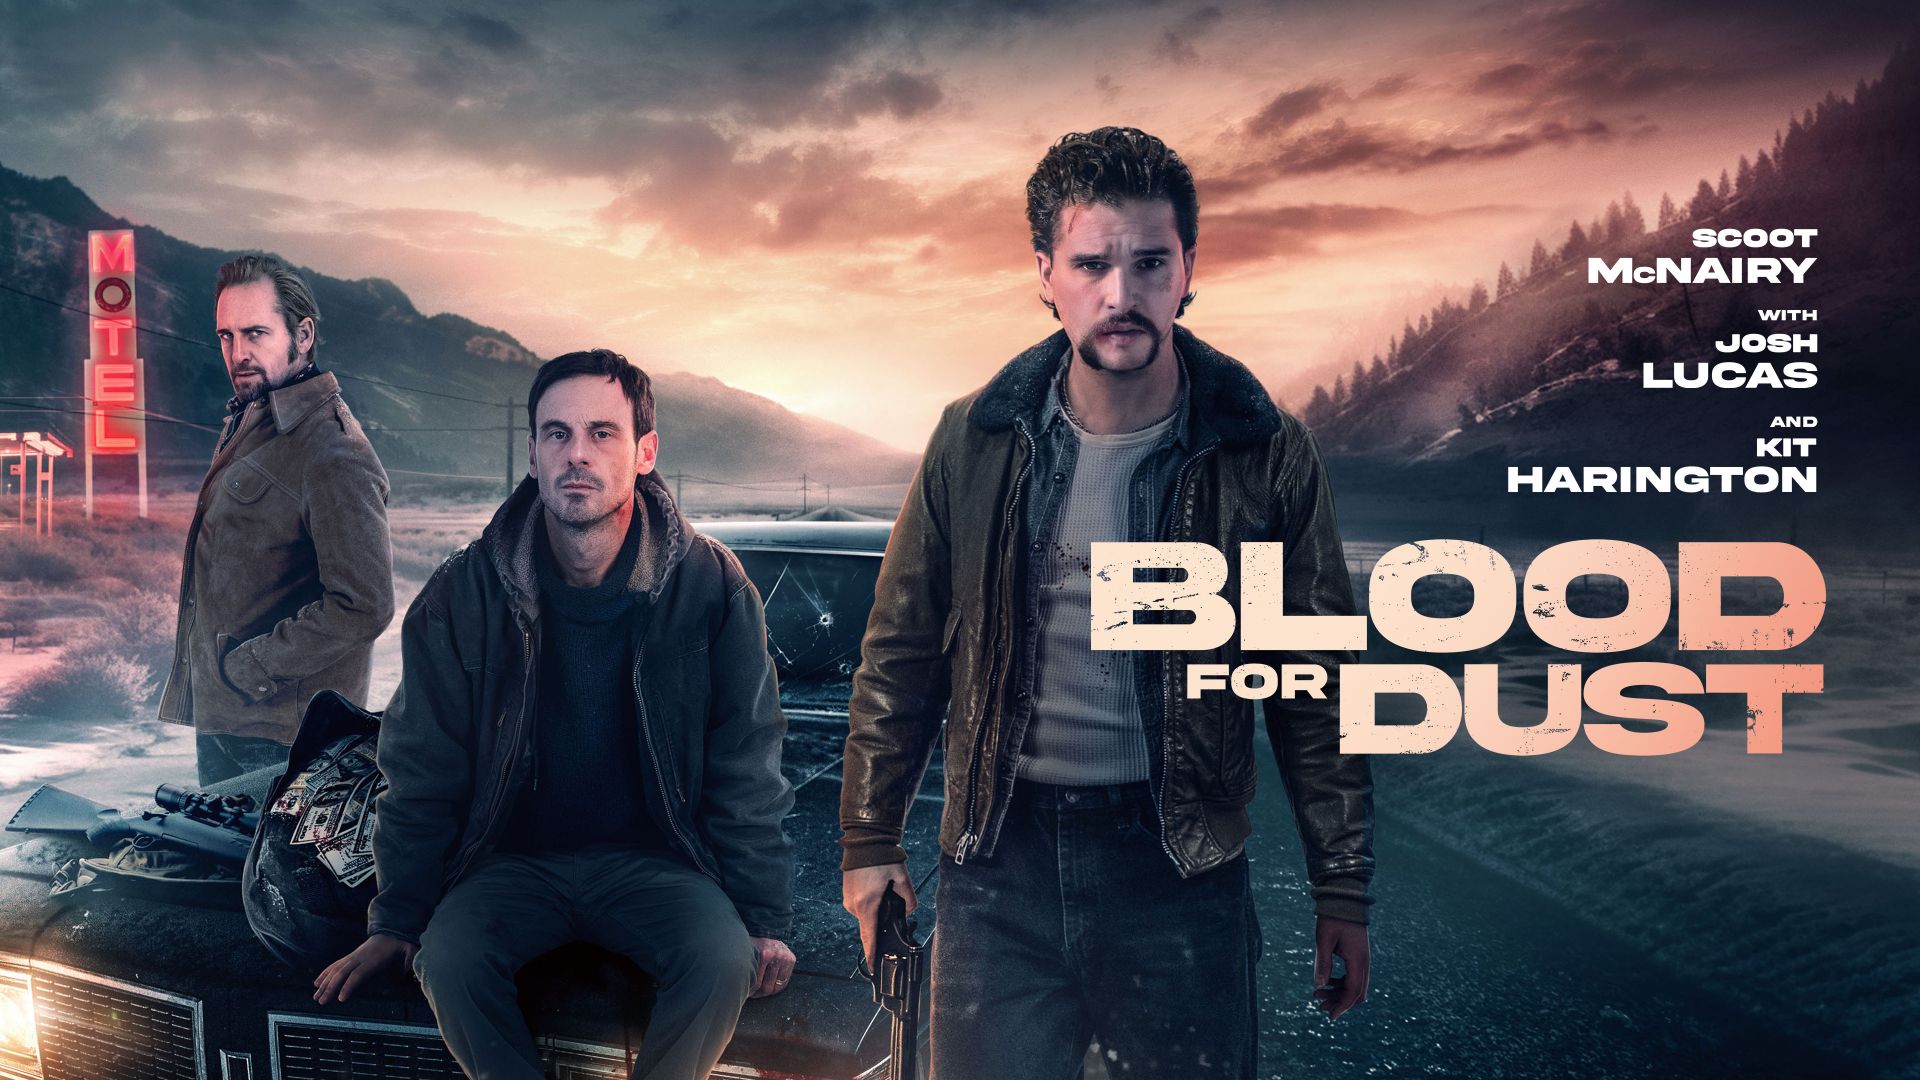 Blood for Dust with Josh Lucas, Scoot McNairy, and Kit Harington in the winter